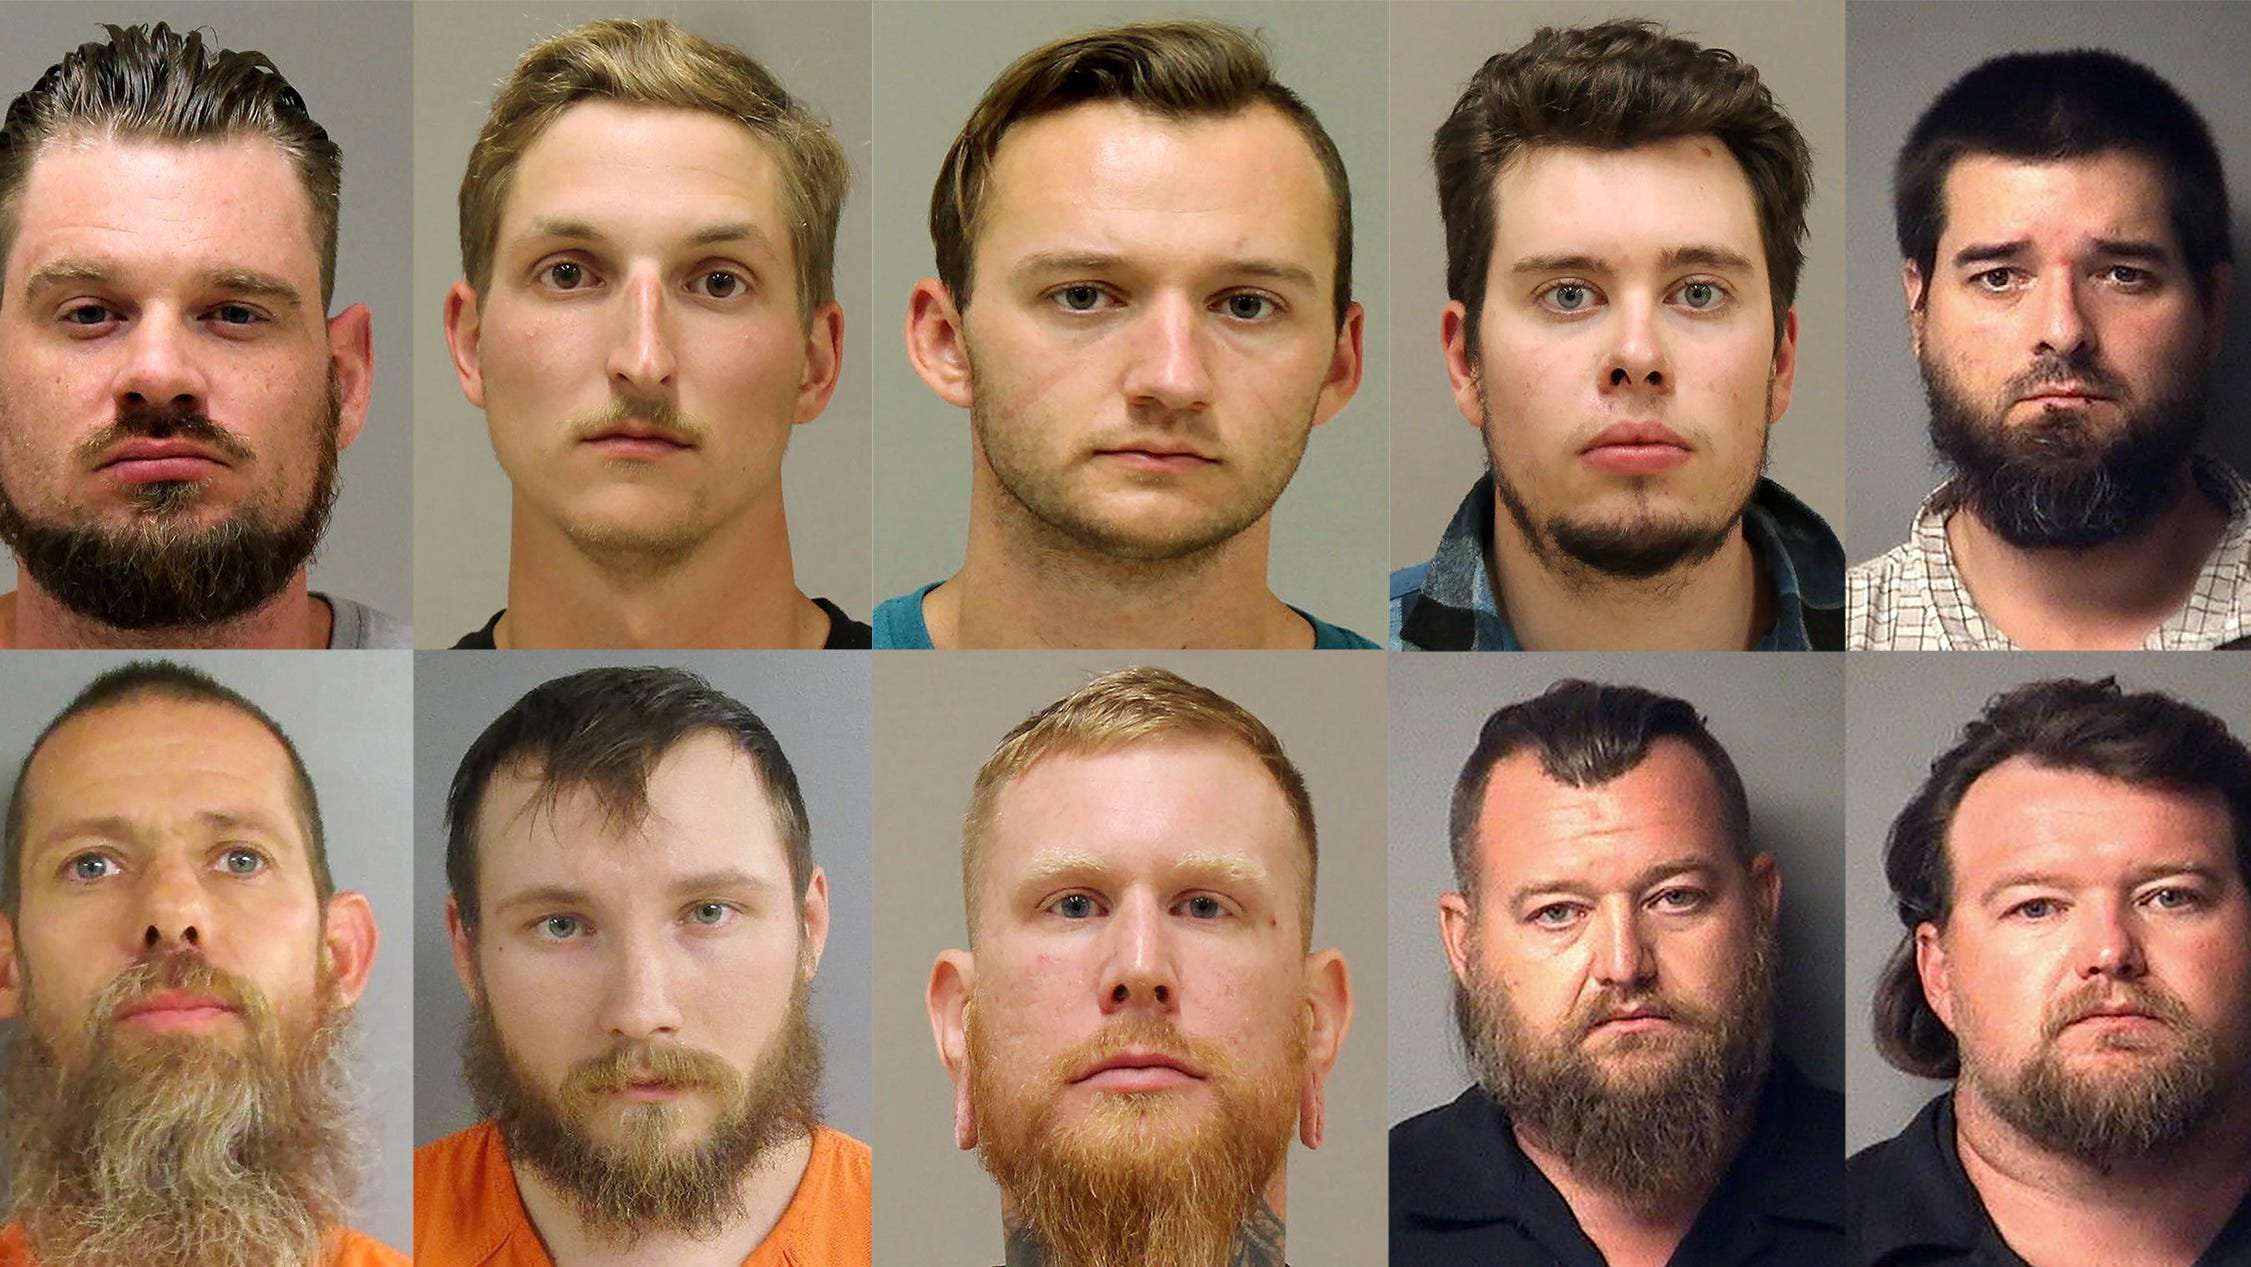 image for 6 suspects in Whitmer kidnapping plot set to stand trial in March